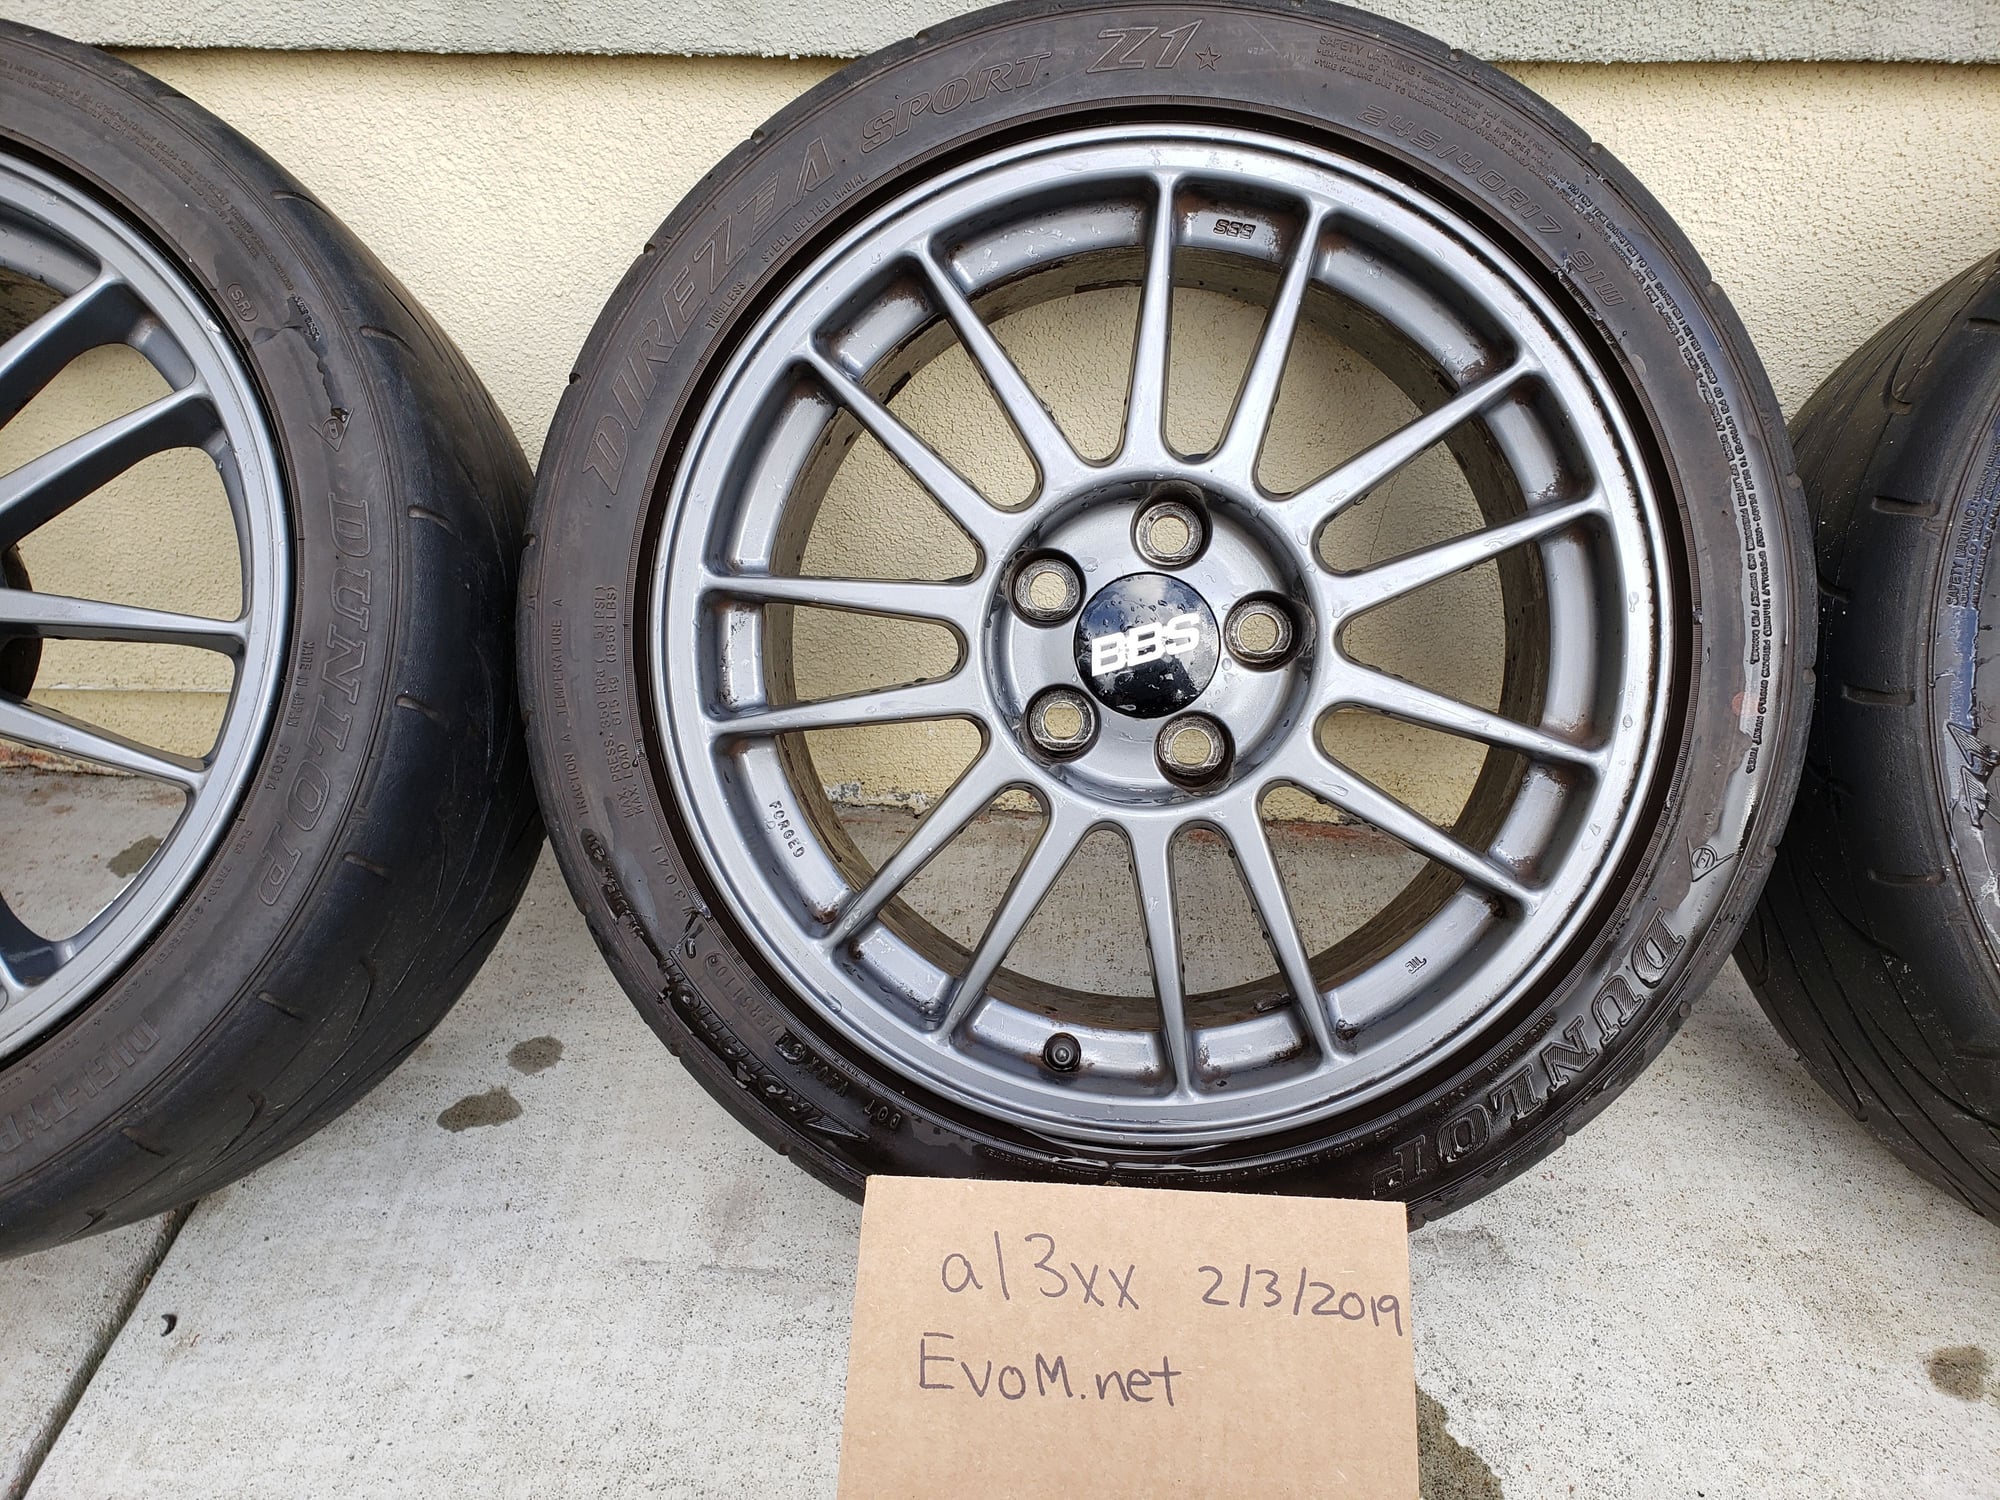 Wheels and Tires/Axles - [FS] OEM BBS MR Wheels & Tires (4) - Used - 2003 to 2006 Mitsubishi Lancer Evolution - Alameda, CA 94501, United States